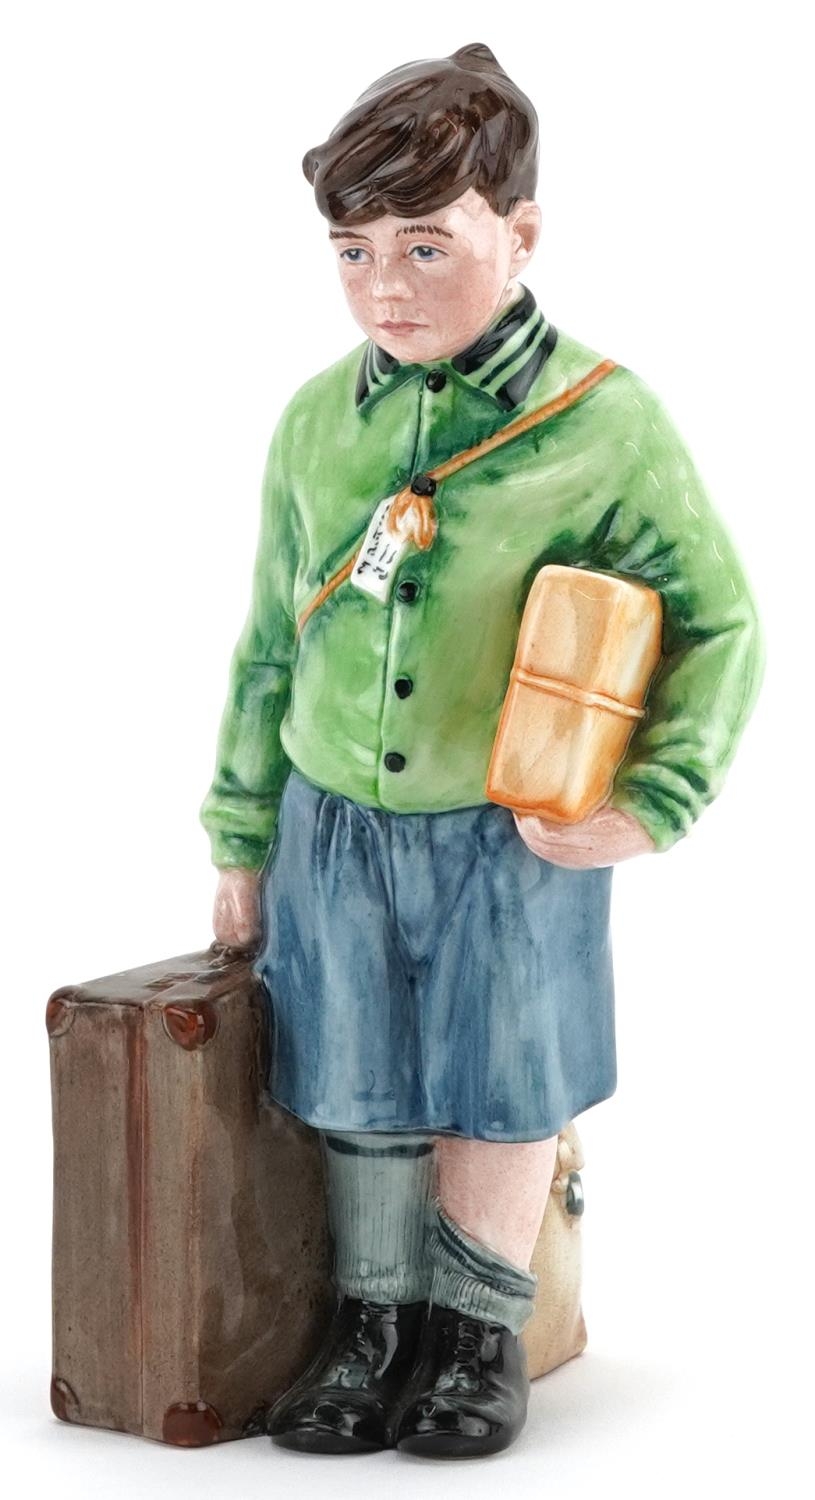 Royal Doulton The Boy Evacuee figure HN3202 with certificate, limited edition 6423/9500, 21cm high